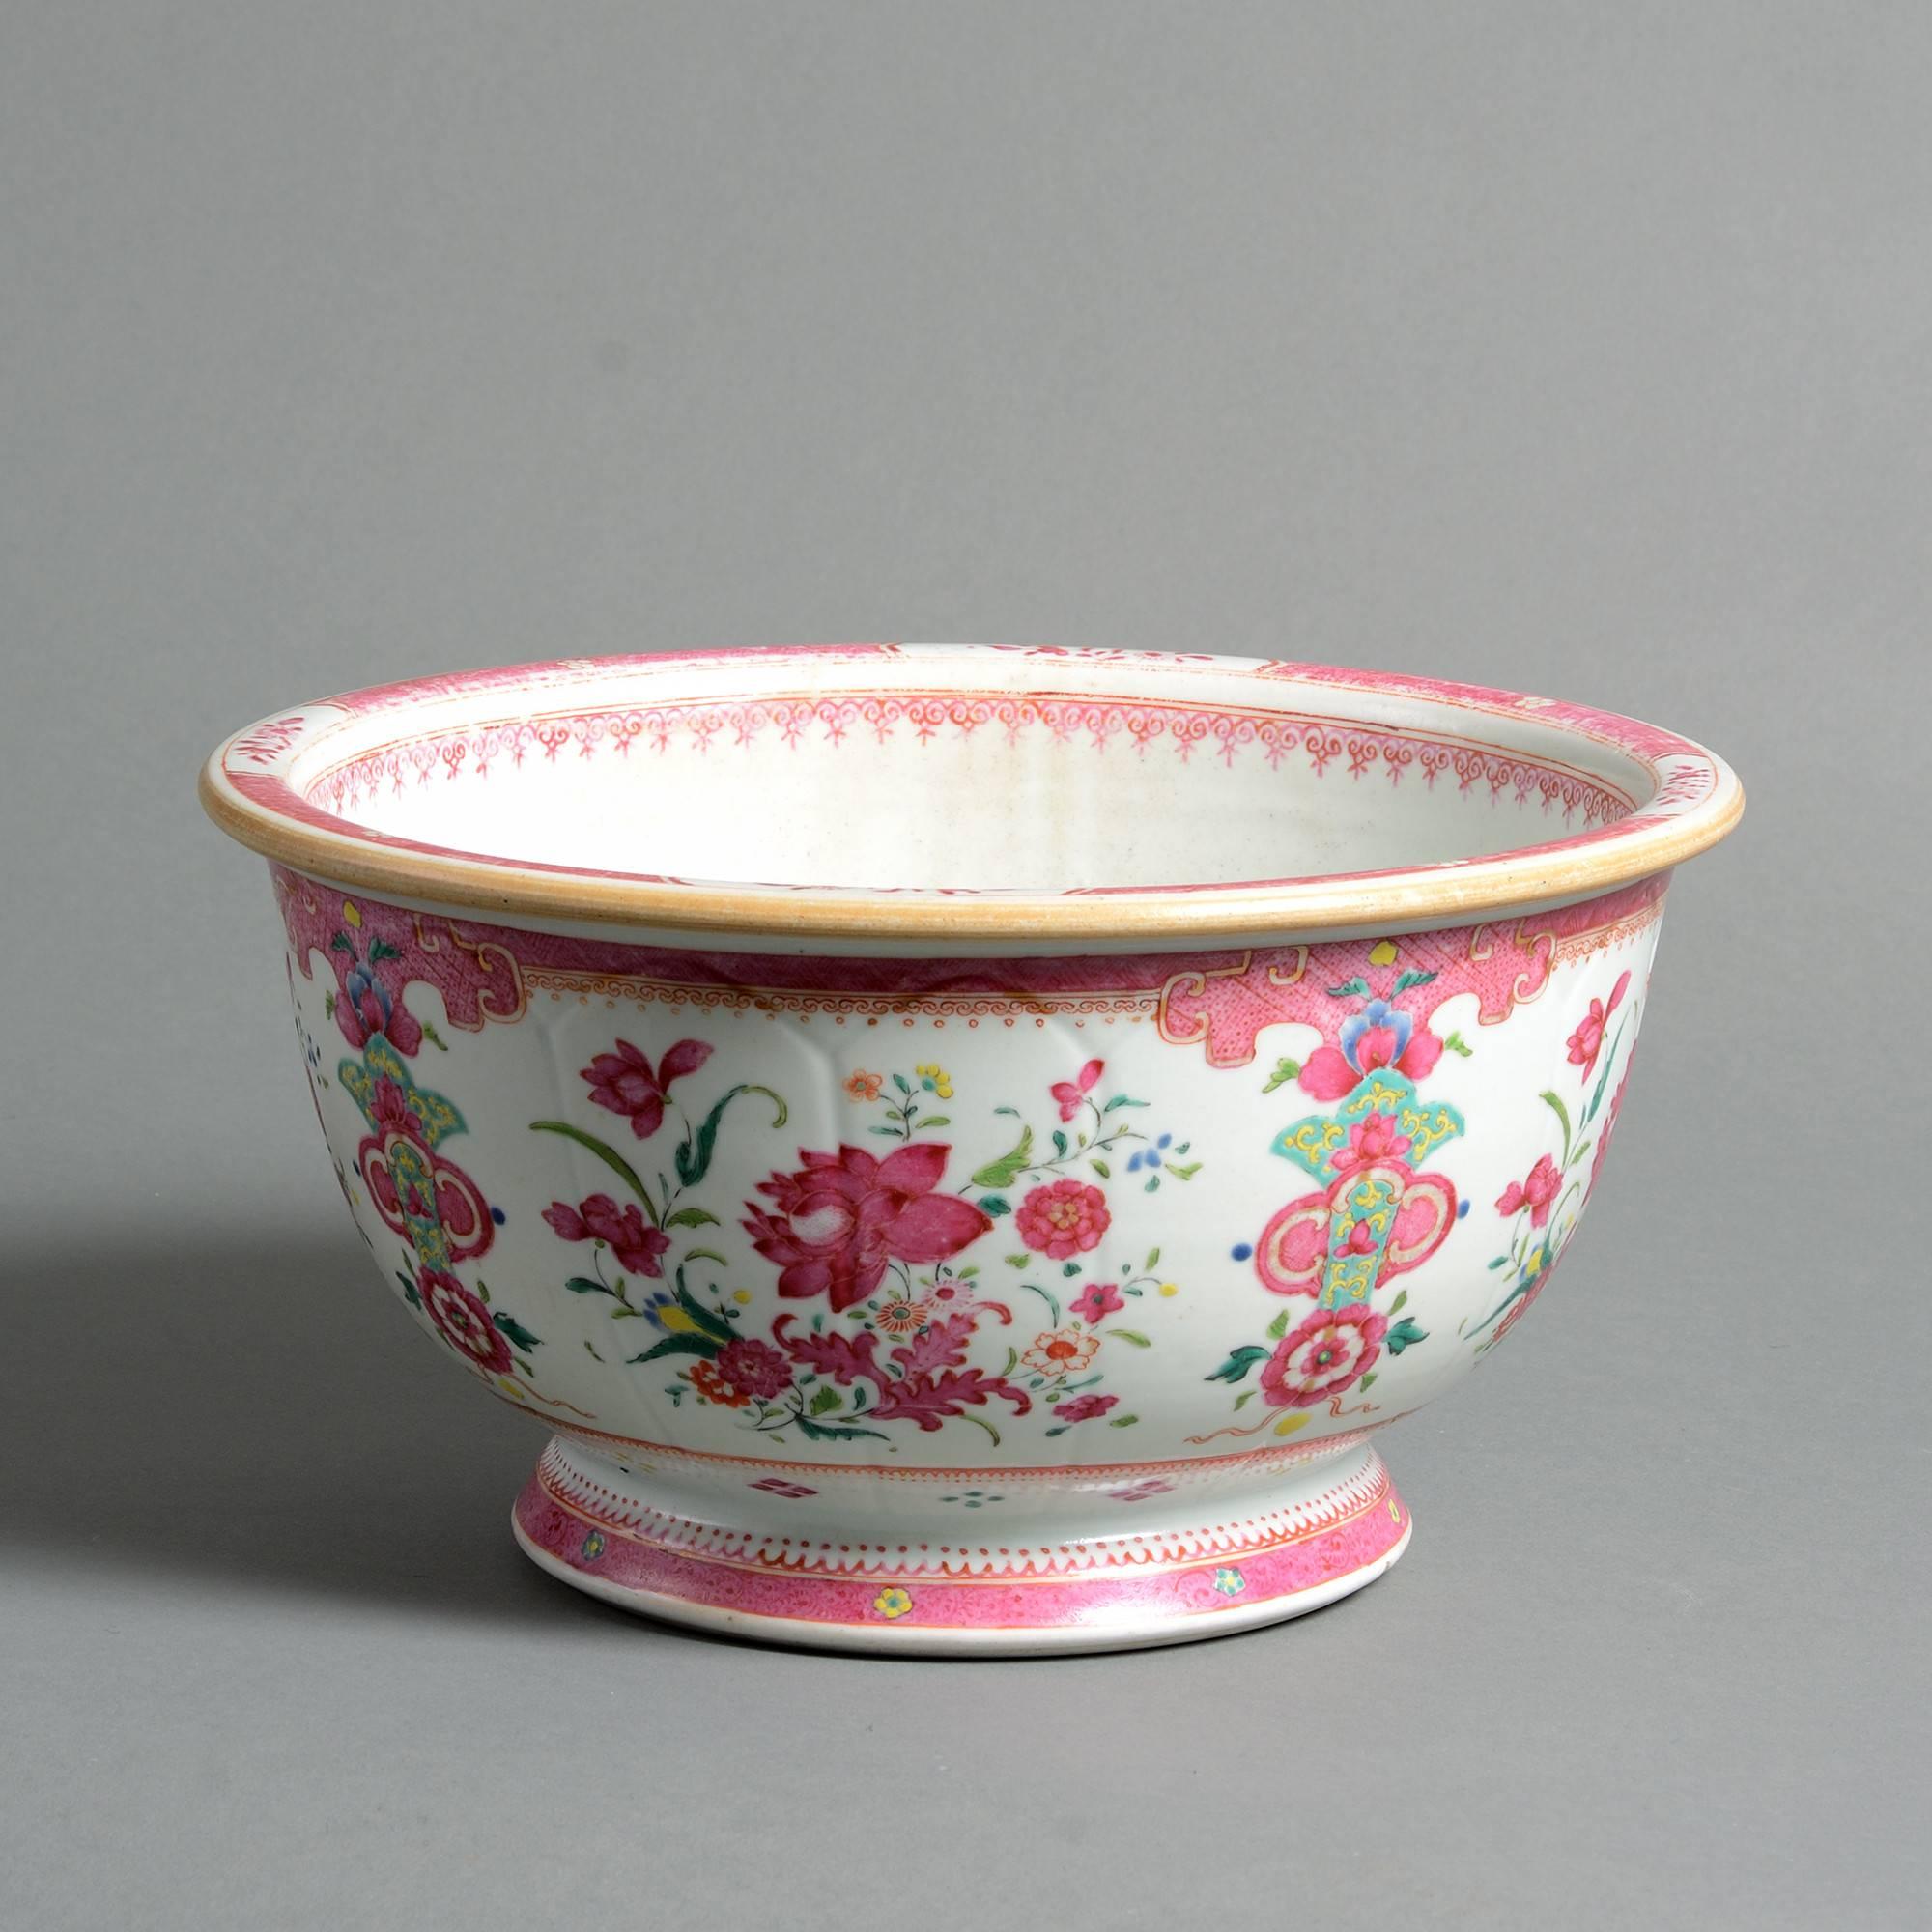 An early 19th century famille rose porcelain bowl with floral decoration throughout.

Qing dynasty, Jiaqing period (1796-1820).